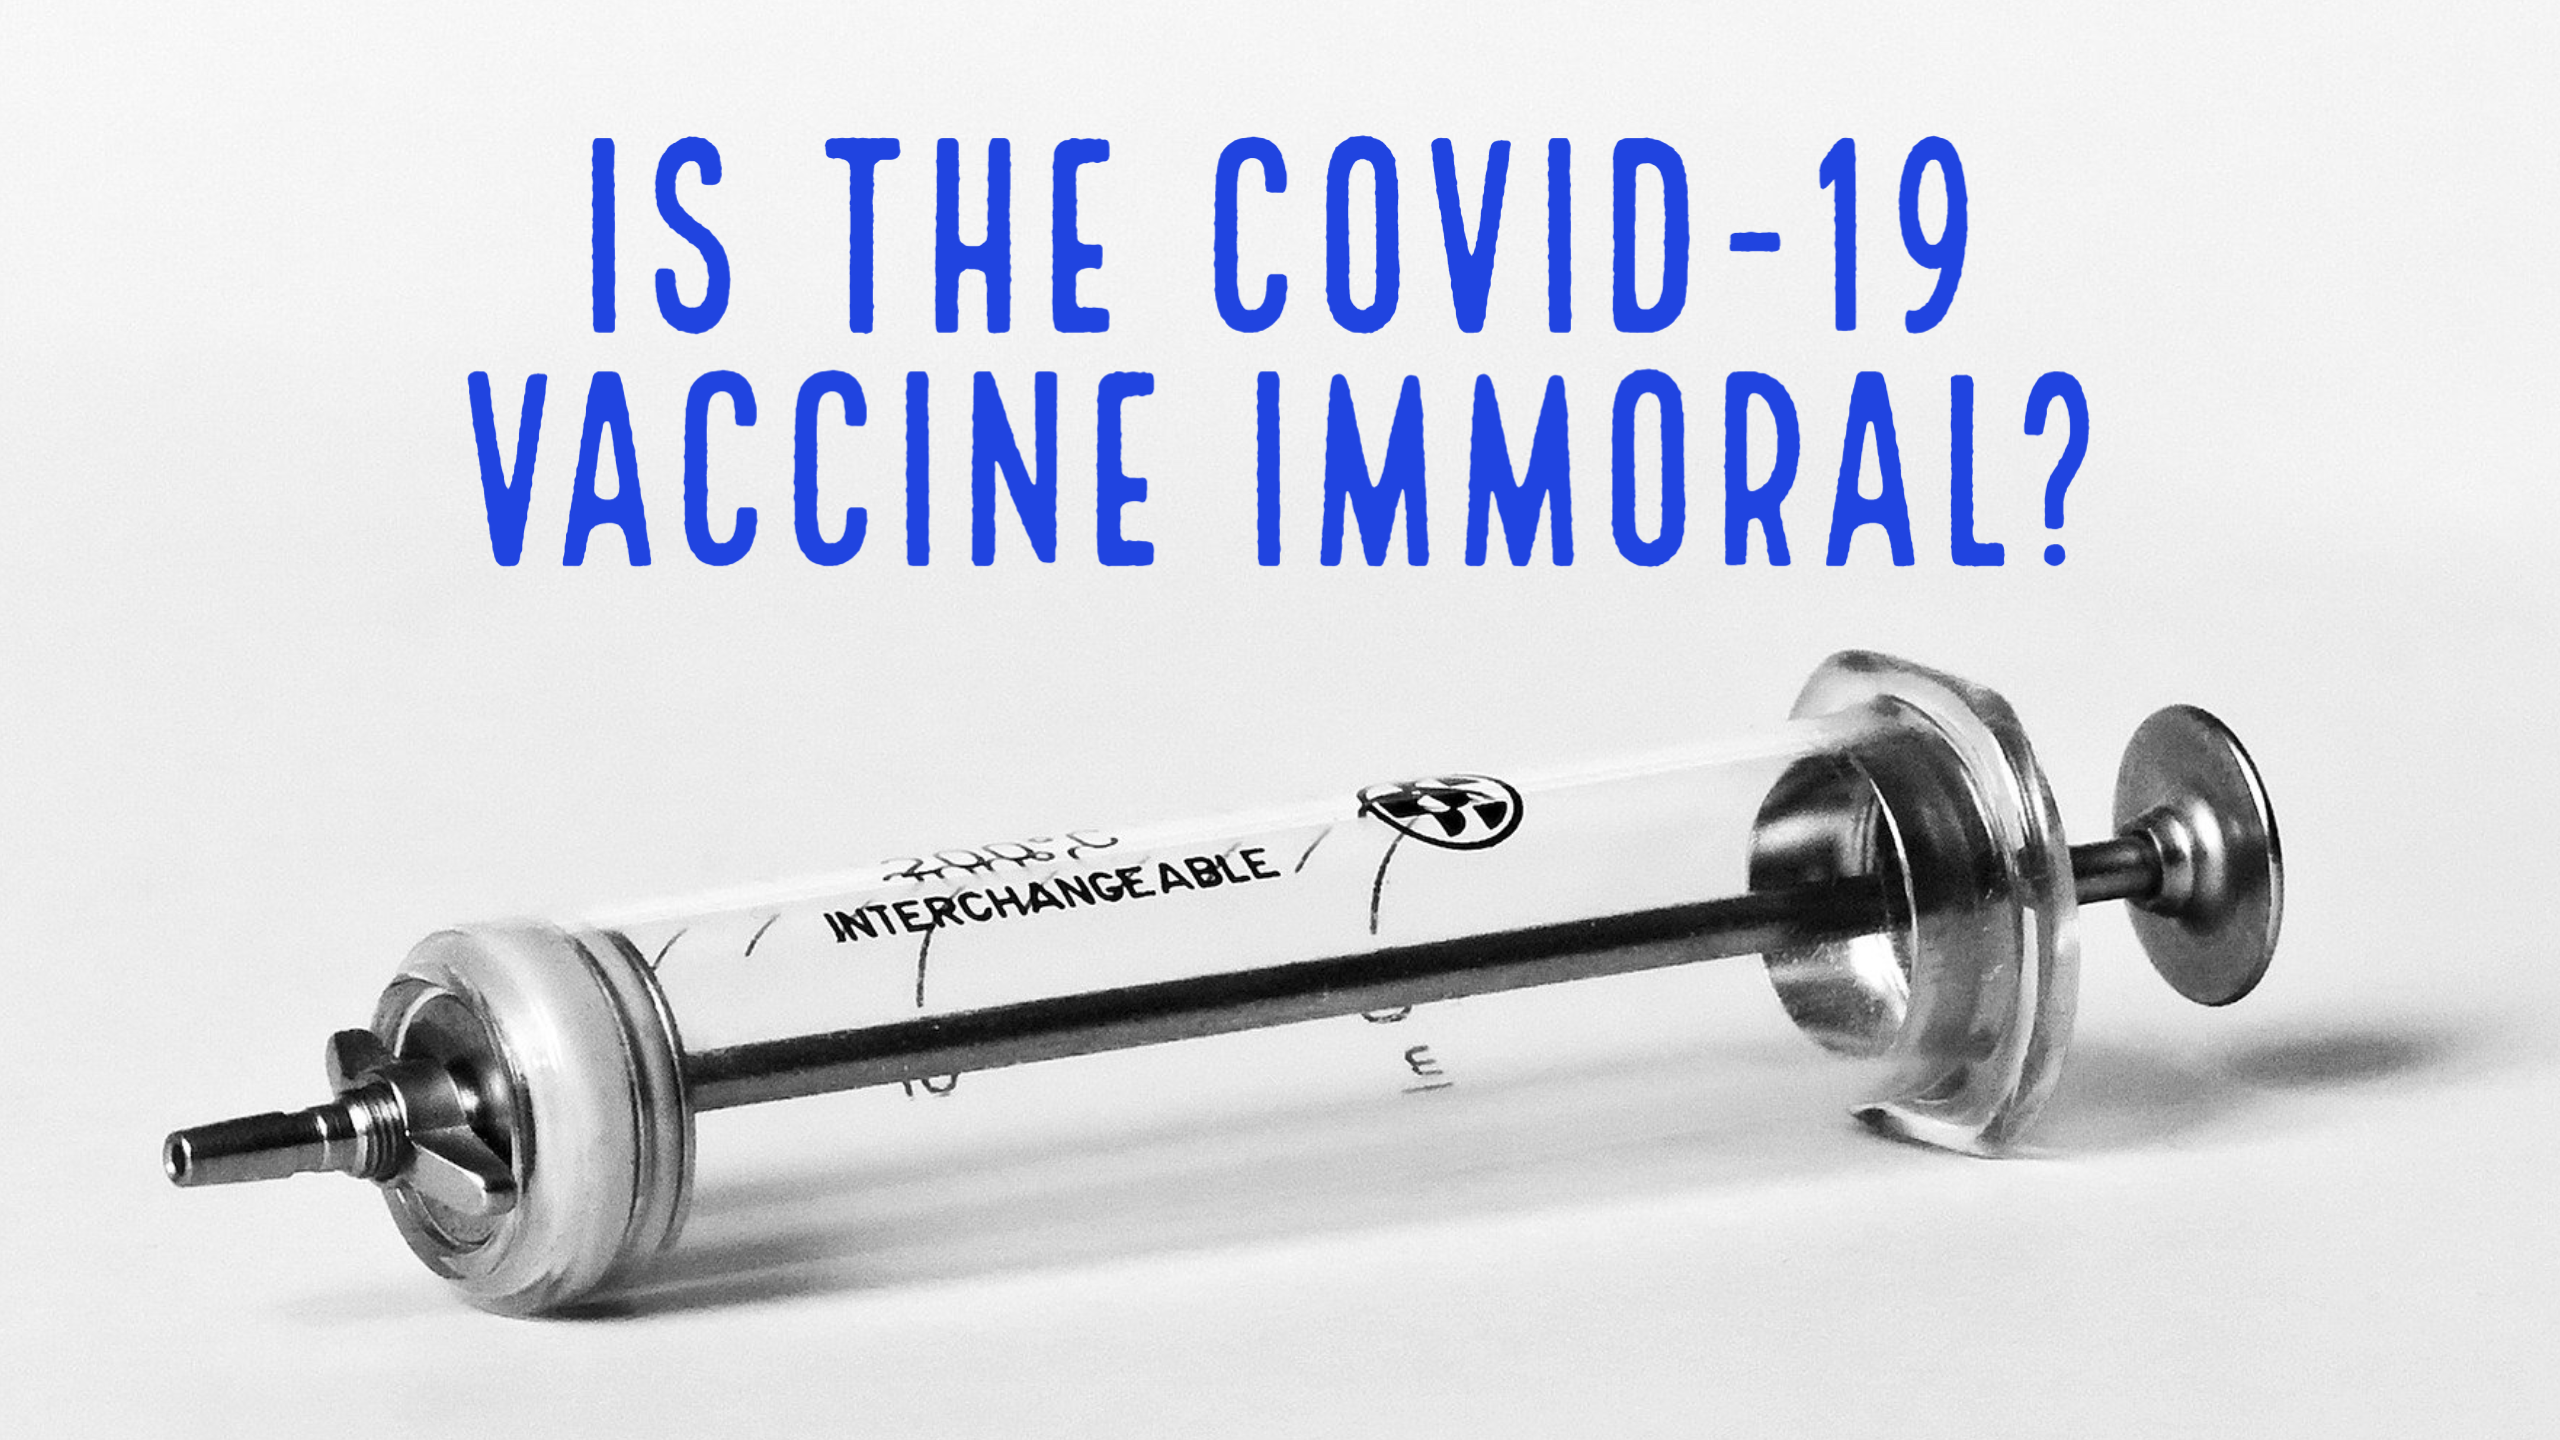 Is it Immoral to Receive Covid-19 Vaccines?